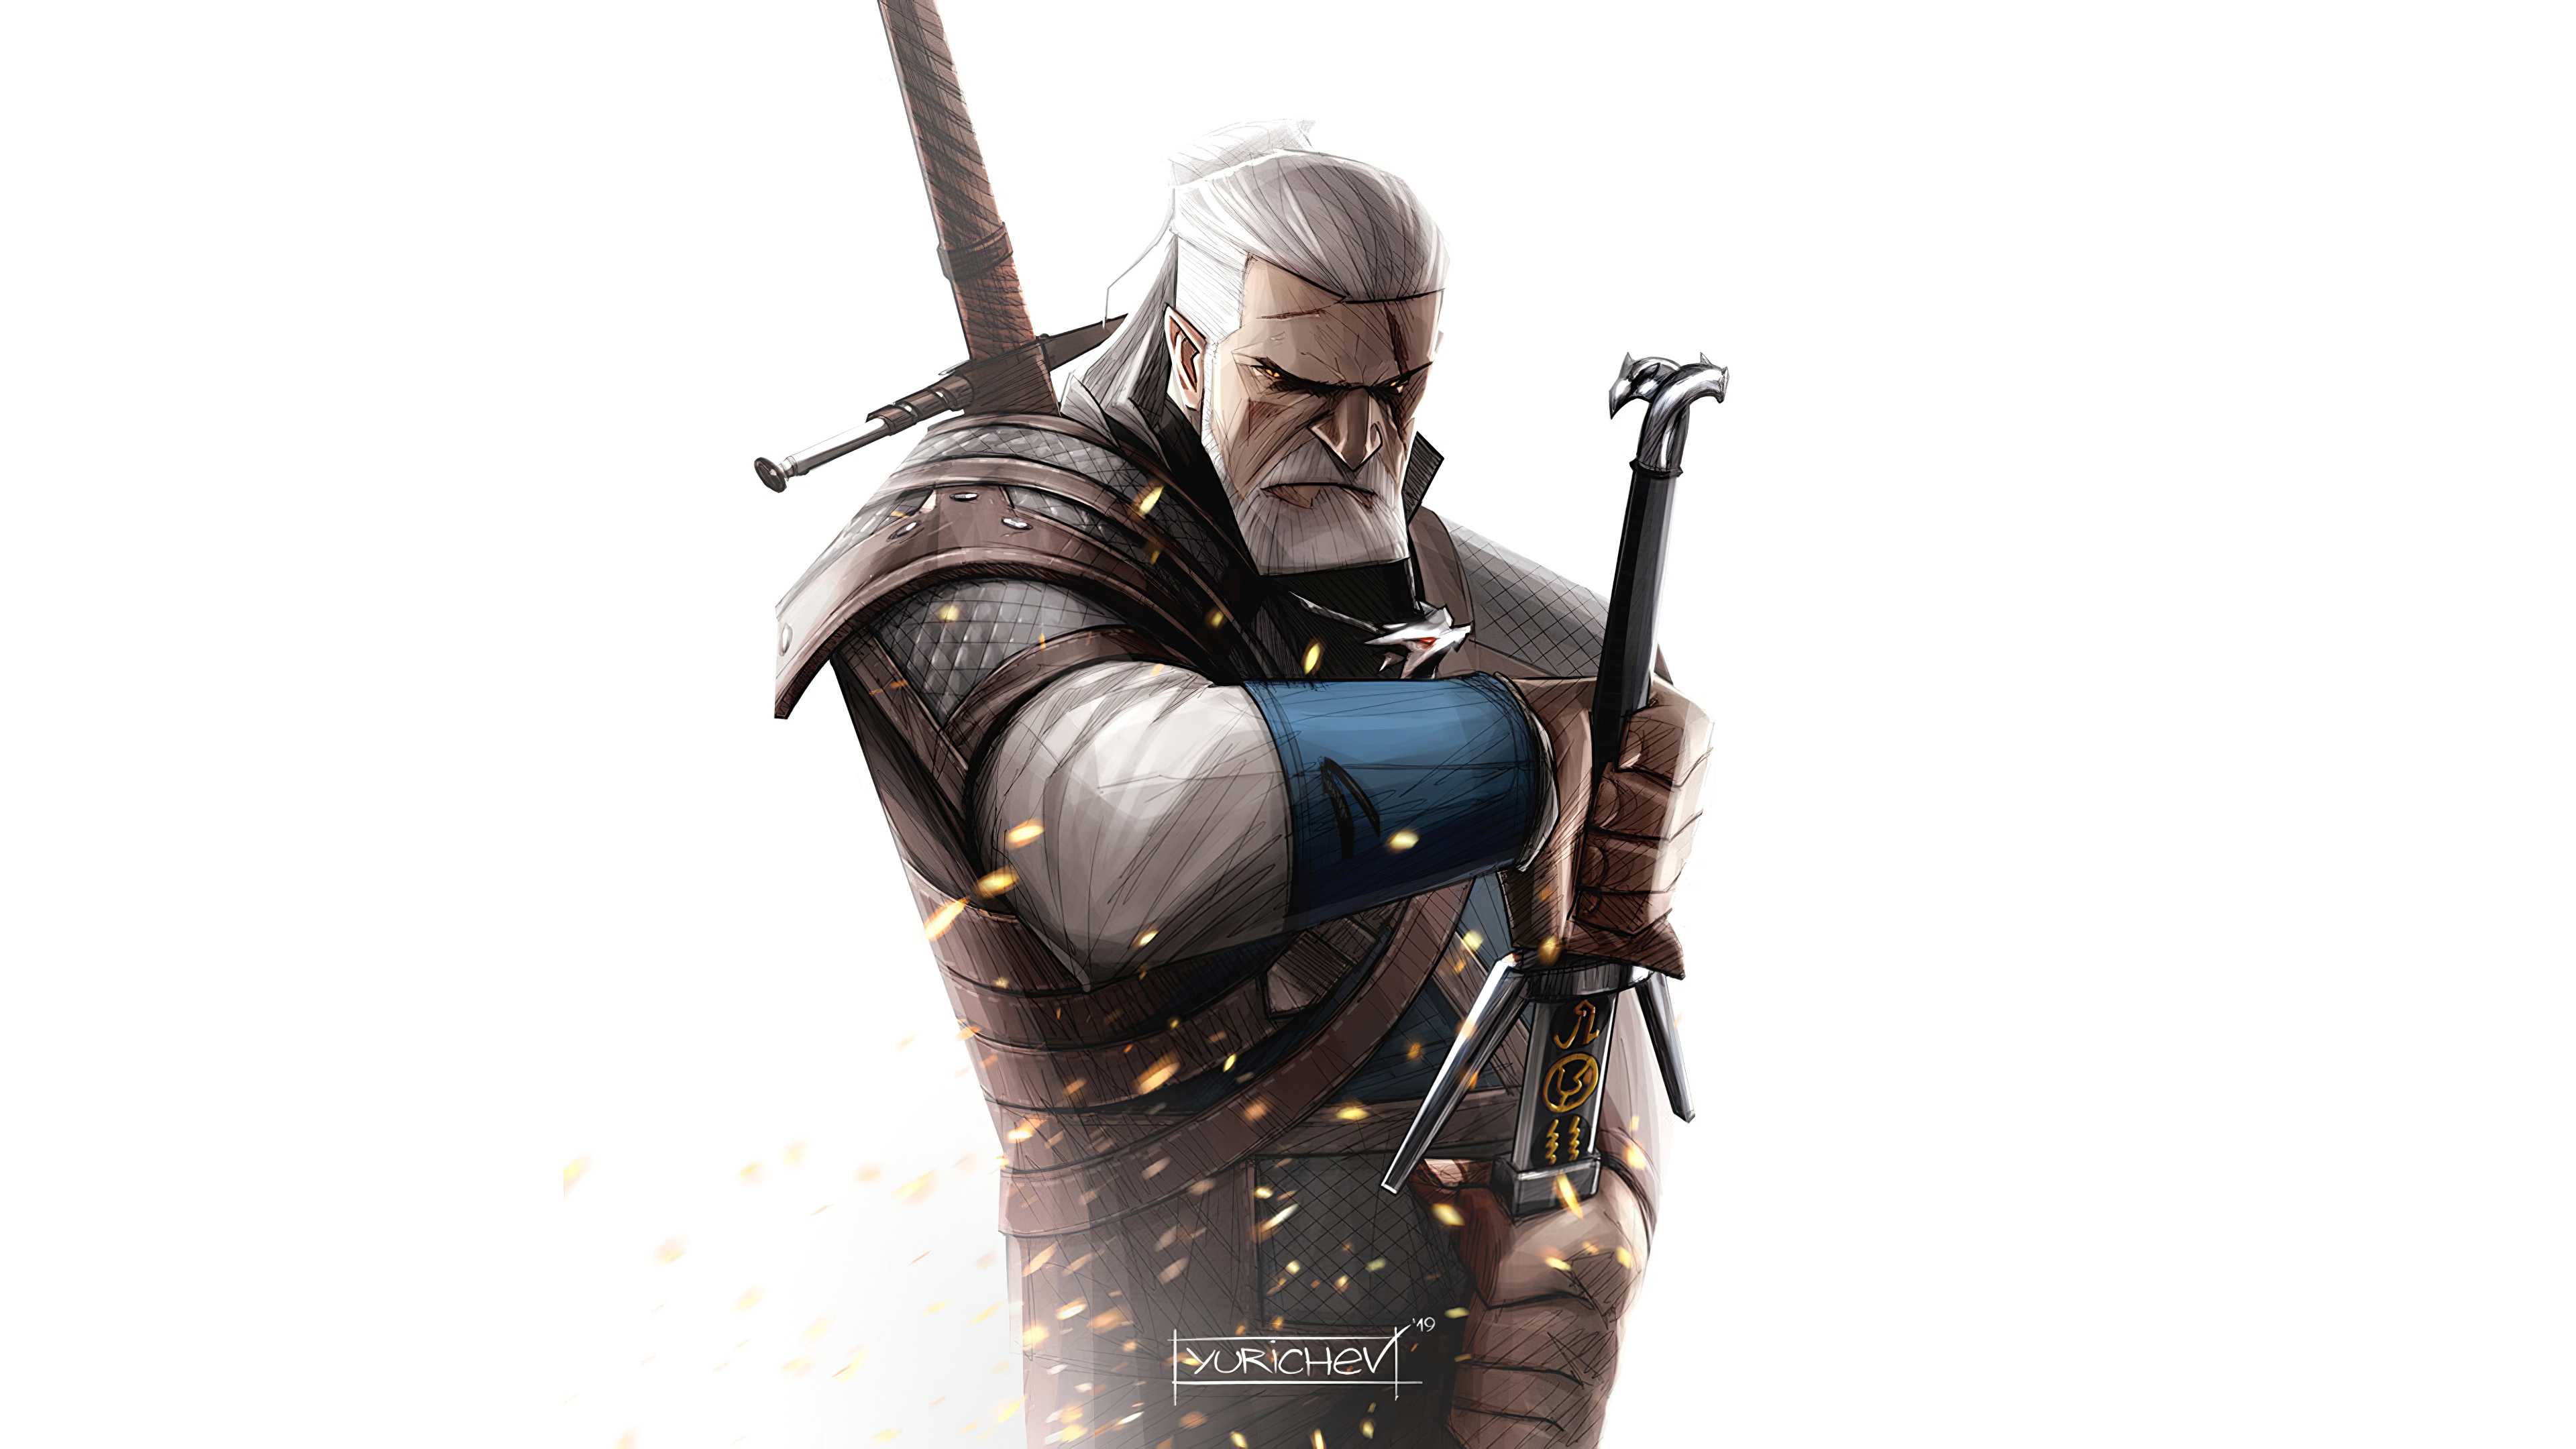 4k Witcher Wallpapers Desktop Android and iPhone  Page 2 of 2  The  RamenSwag